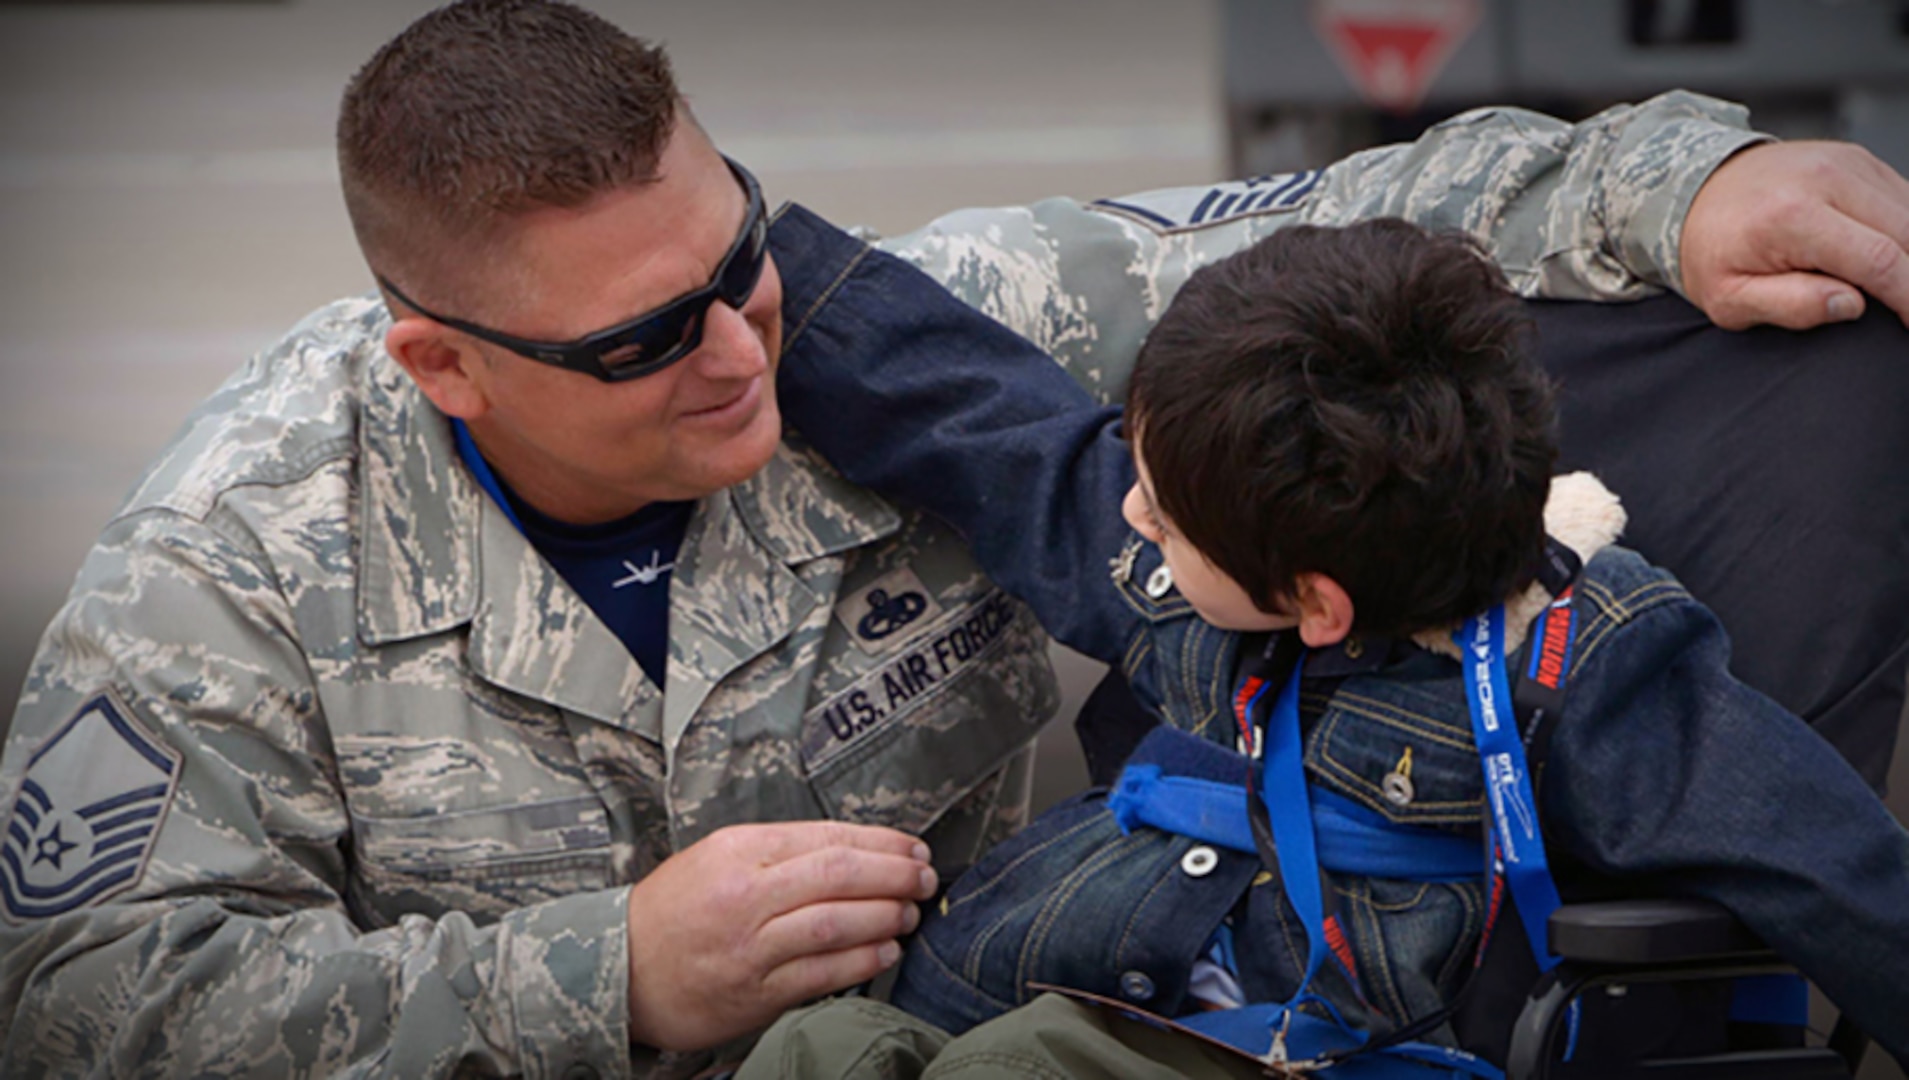 The Air Force hosted an Exceptional Family Member Program summit Aug. 28-29 at Joint Base San Antonio-Randolph. EFMP allows Airmen to proceed to assignment locations where suitable medical, educational and other resources are available to treat special needs family members.